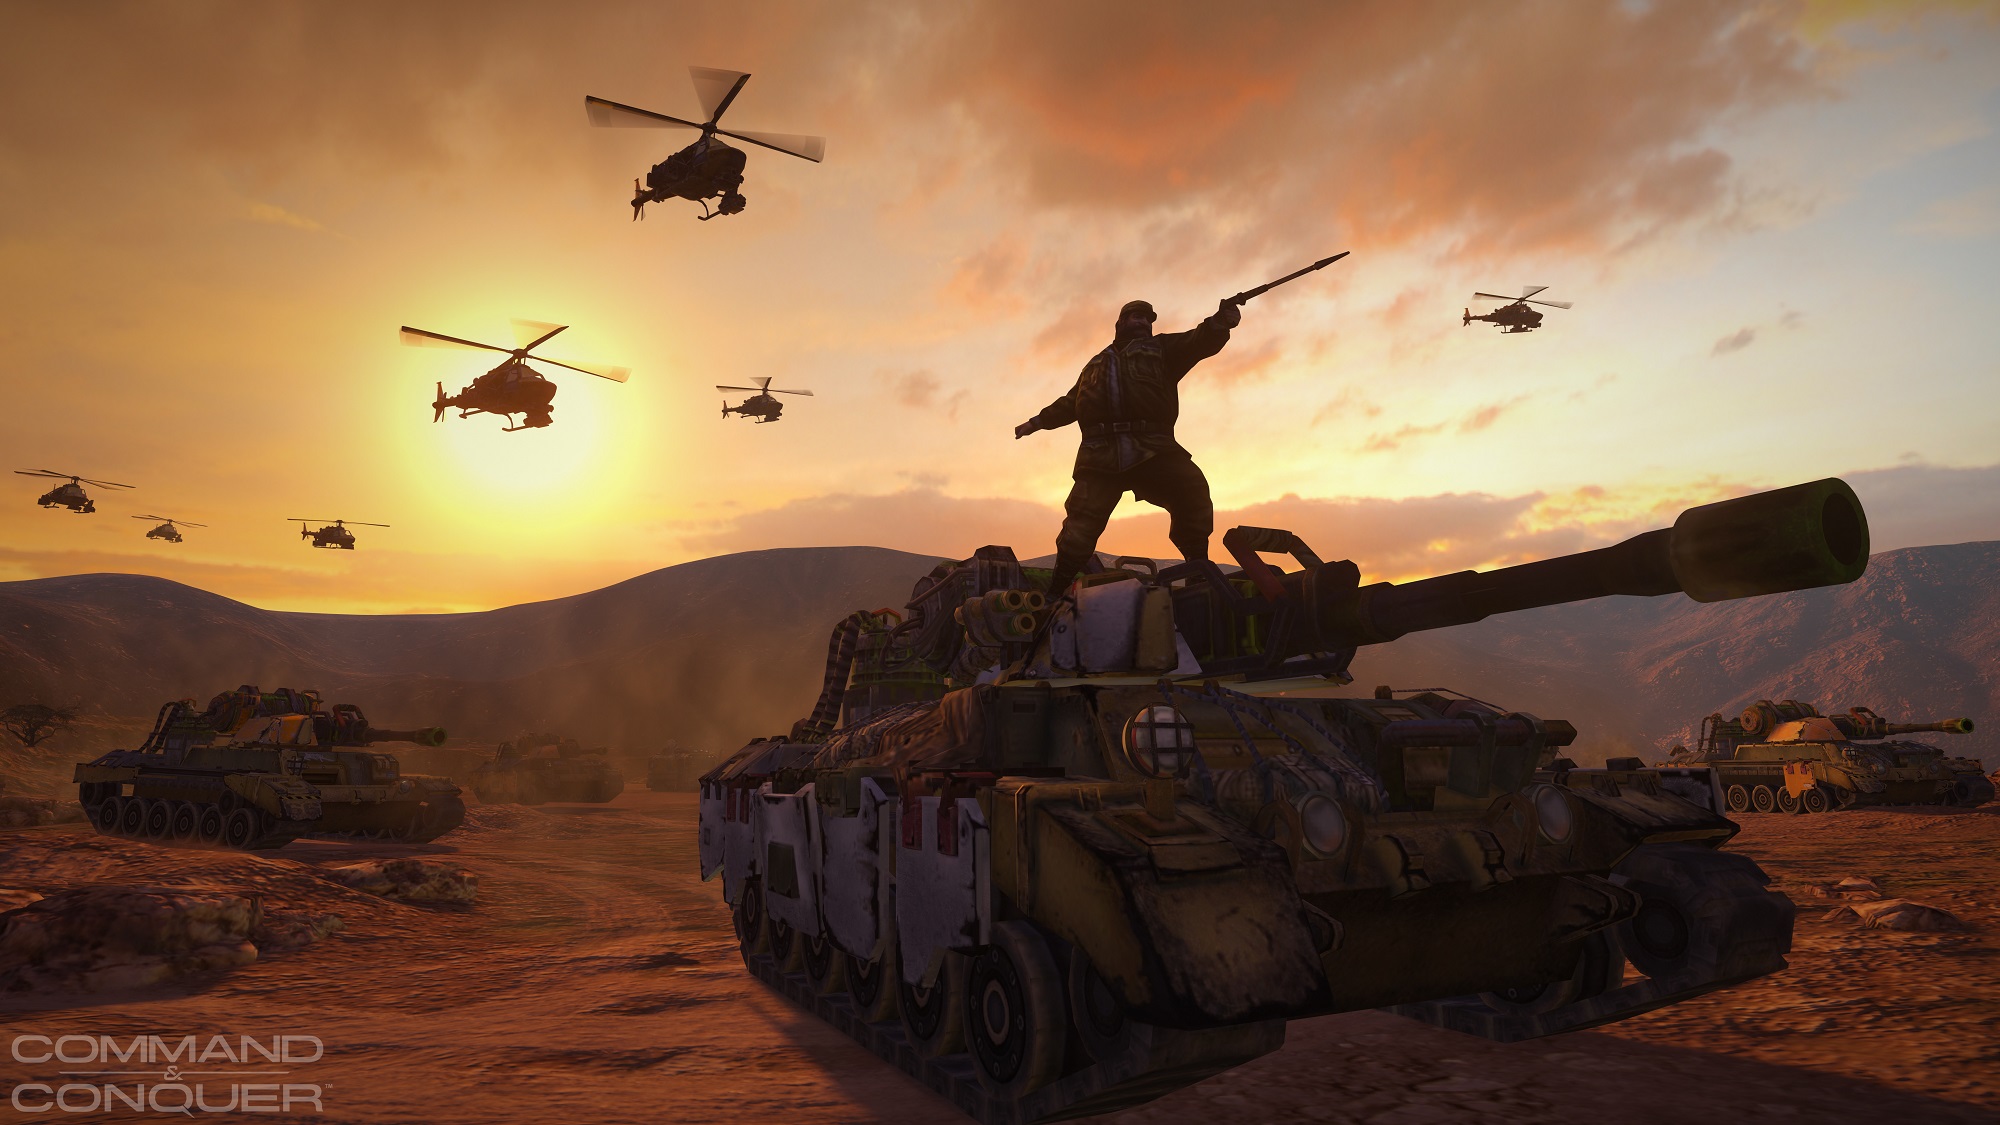 play command and conquer free online